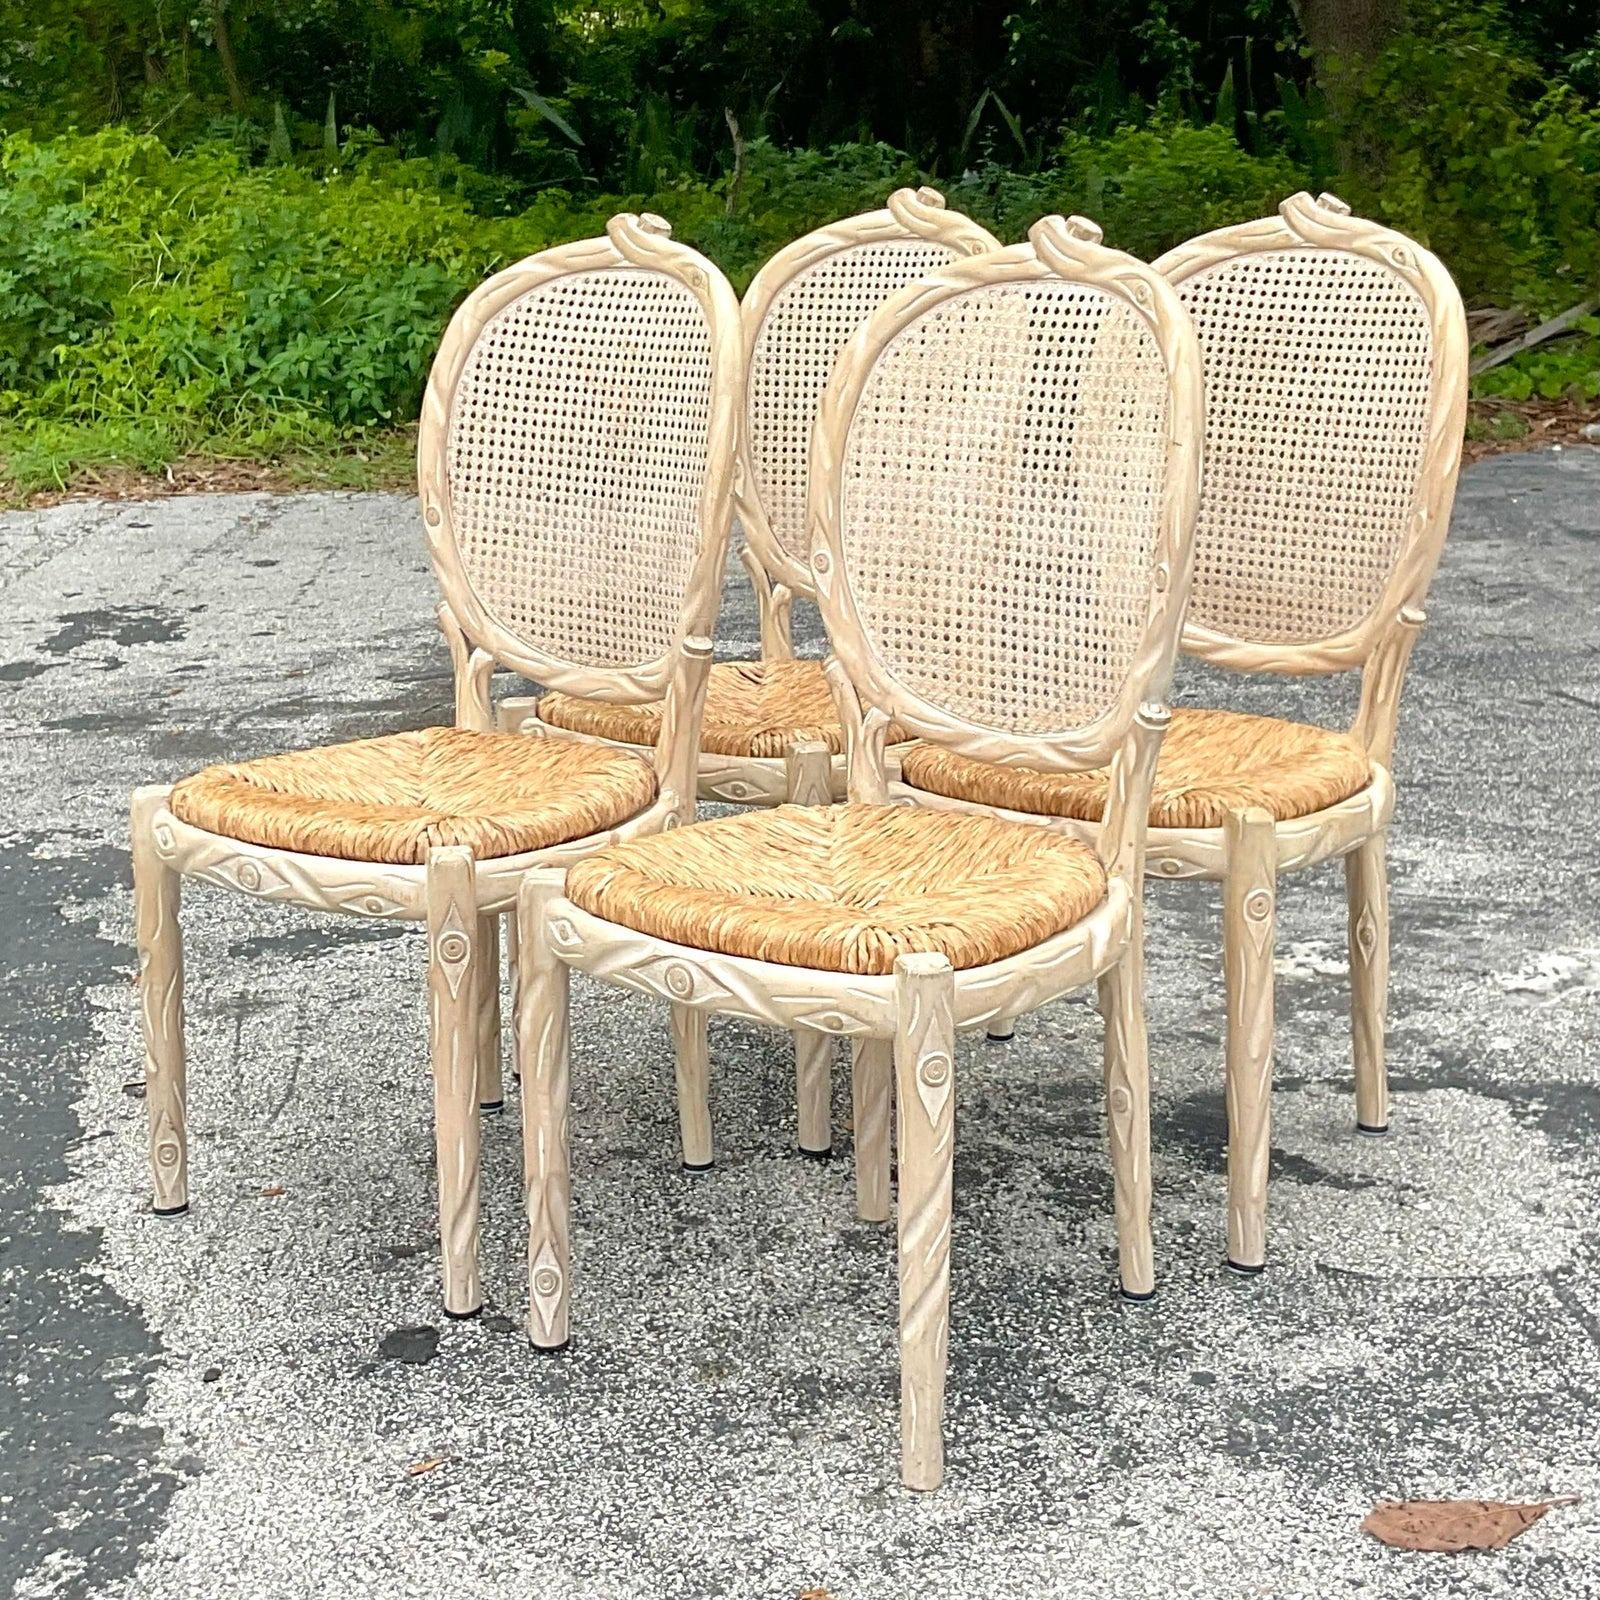 Late 20th Century Vintage Boho Carved Faux Bois Dining Chairs - Set of 4 In Good Condition For Sale In west palm beach, FL